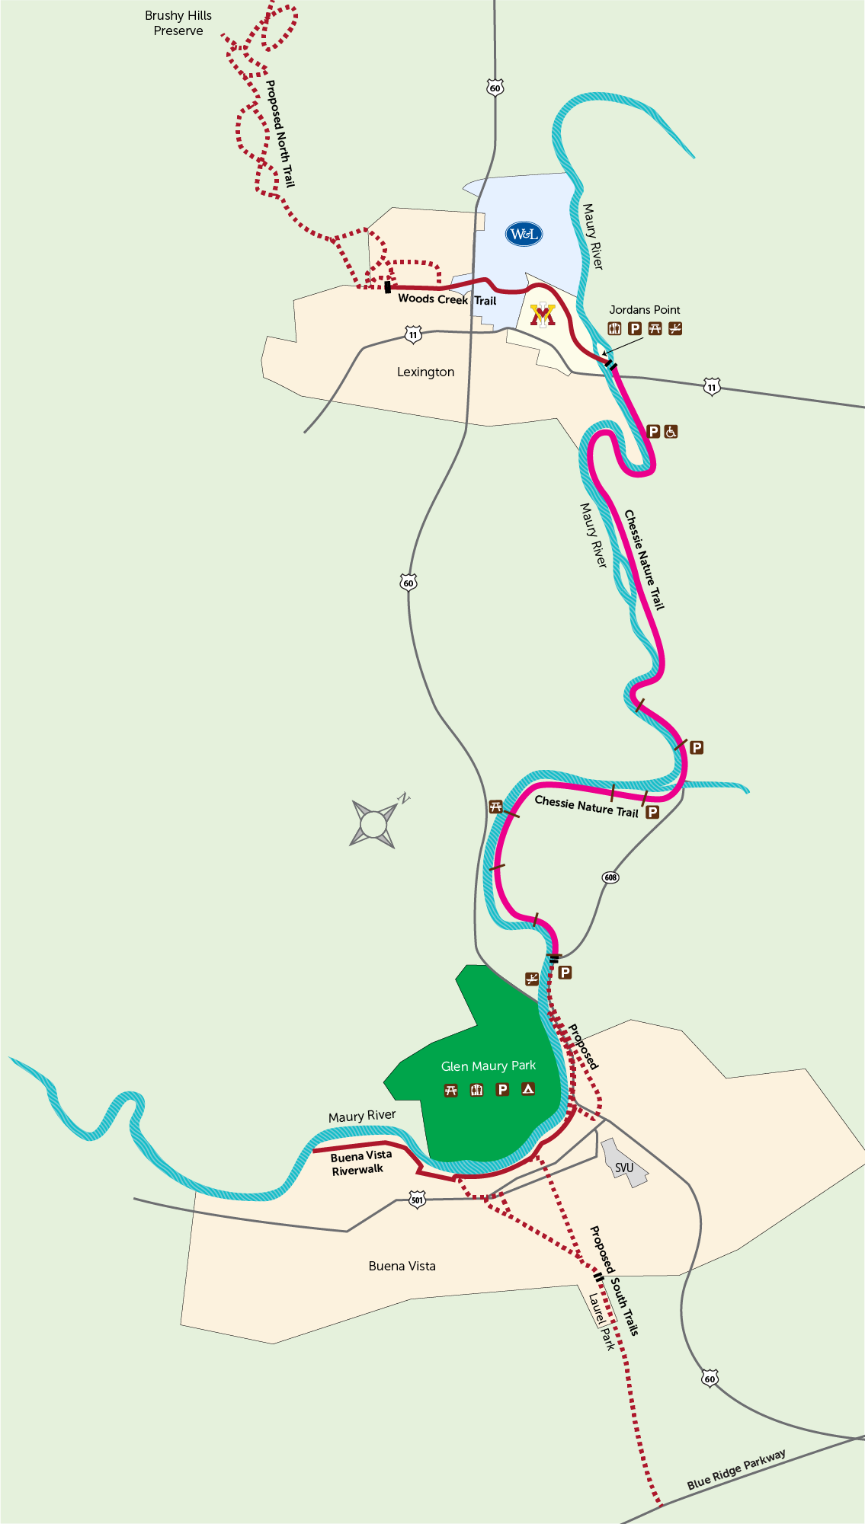 A map showing the current route of the Chessie Trail along with the proposed connections to Brushy Hills and the Blue Ridge Parkway